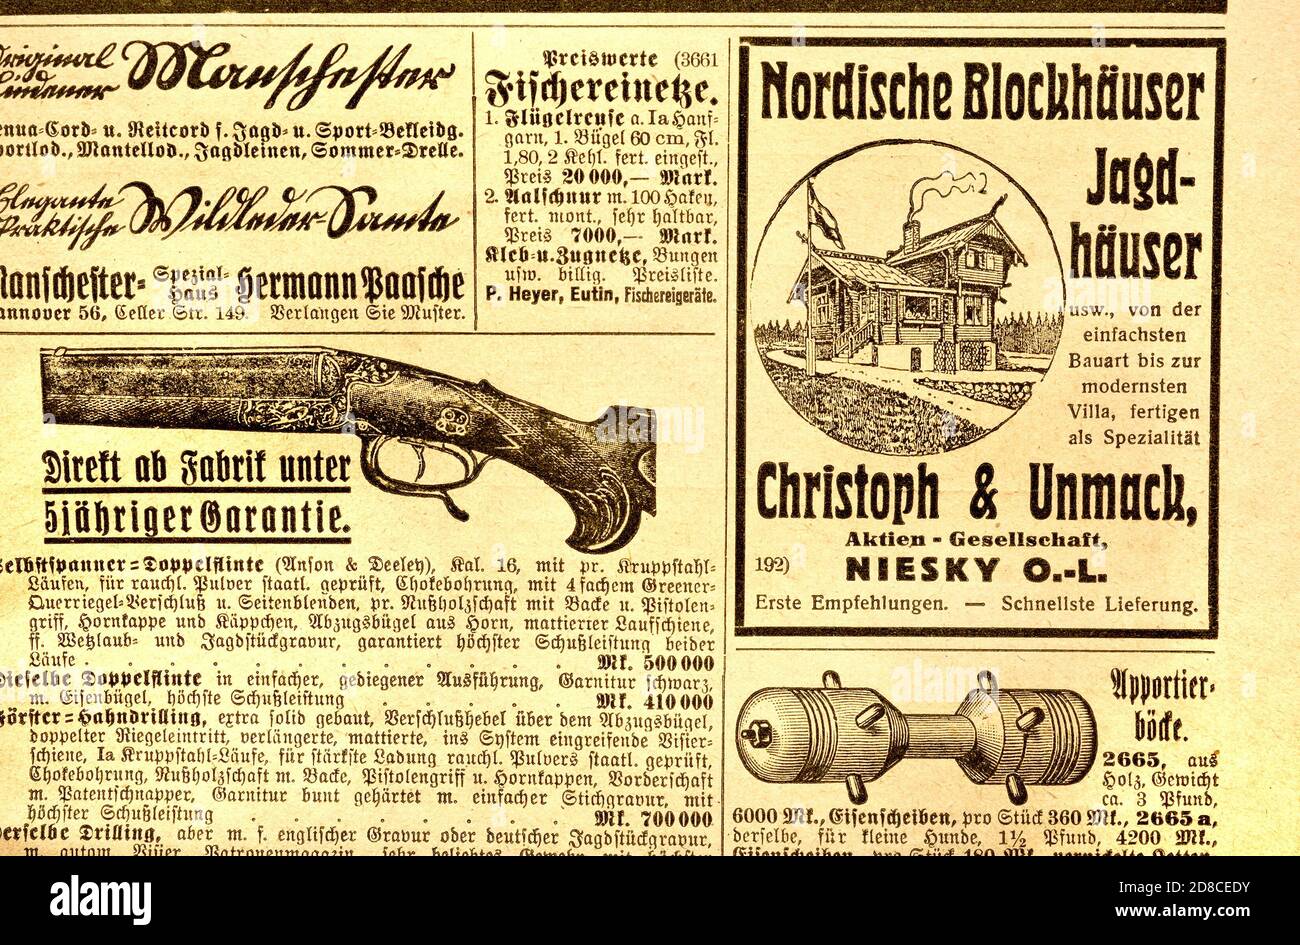 German document: Hunters' Newspaper / magazine: Deutsche Jaeger Zeitung (April 1923) classified ads at the back for hunting rifles, hunting lodges and Stock Photo